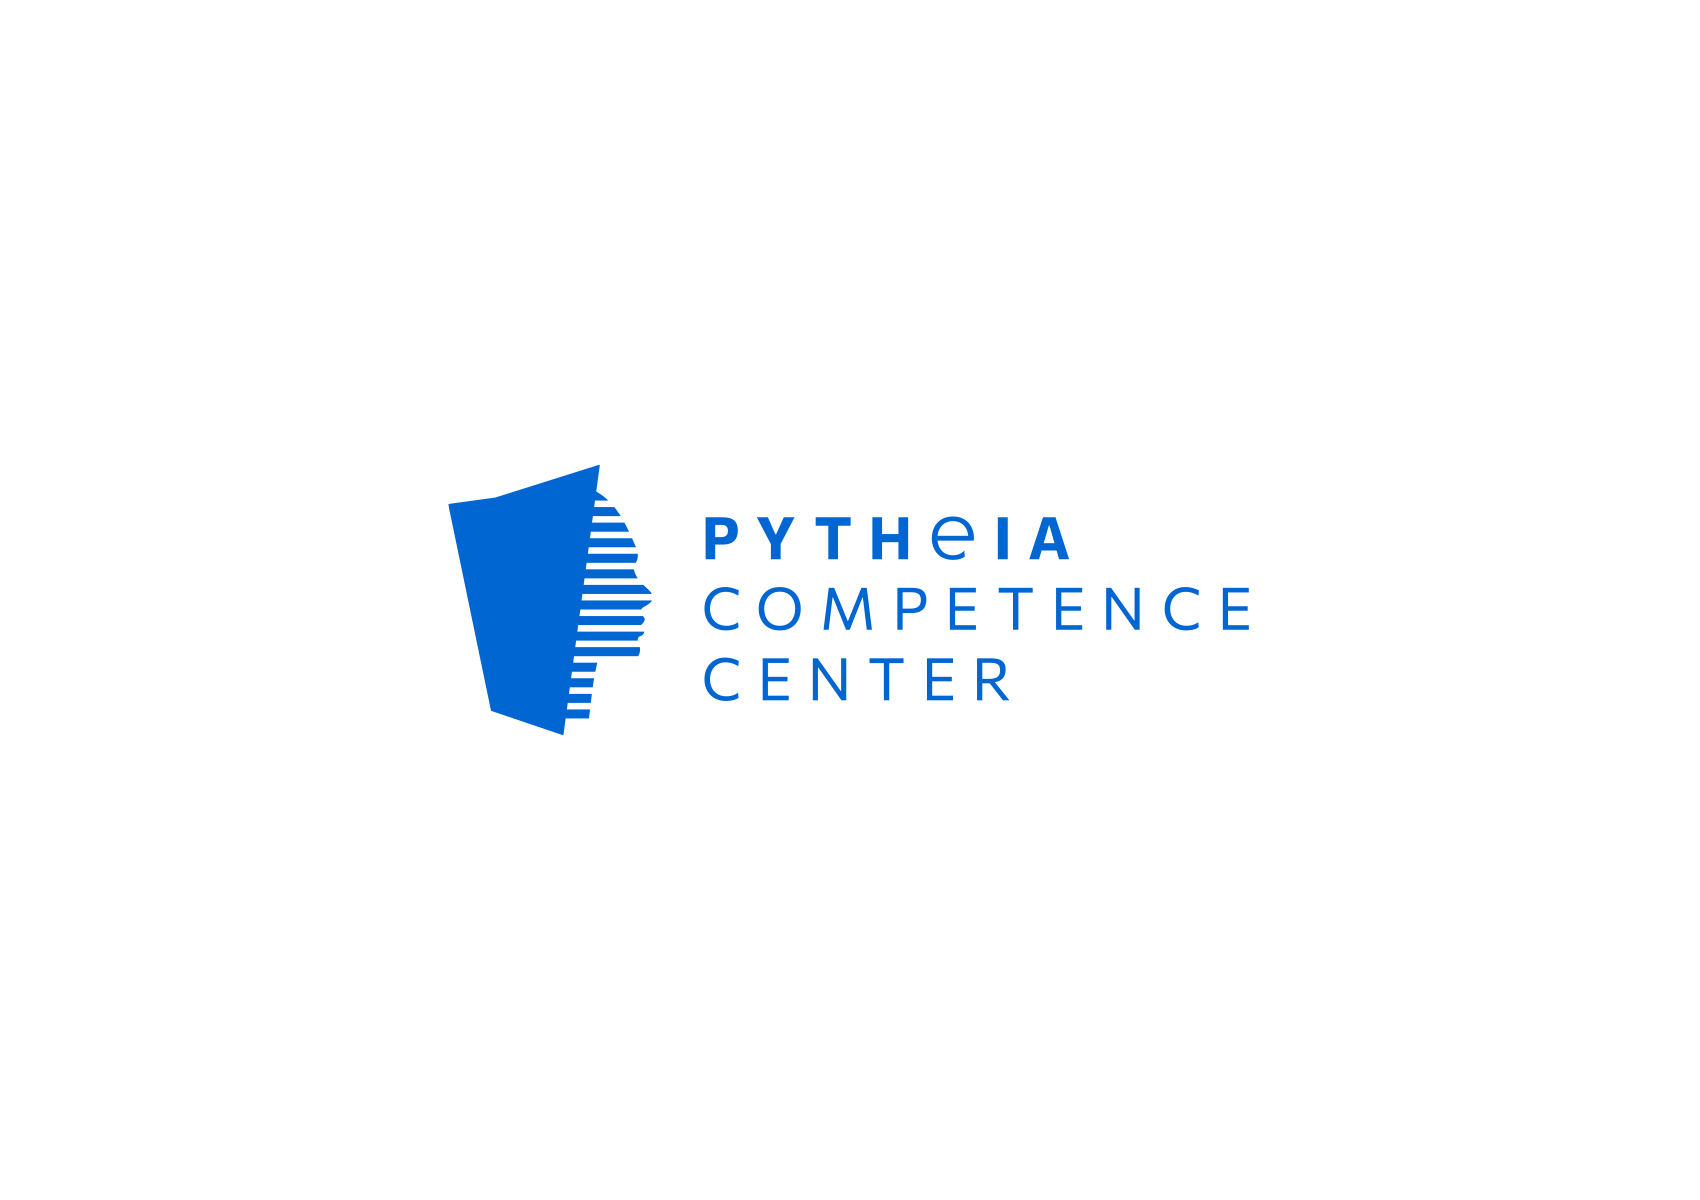 PYTHeIA Competence Center reversed logo 1700x1200 by xhristakis